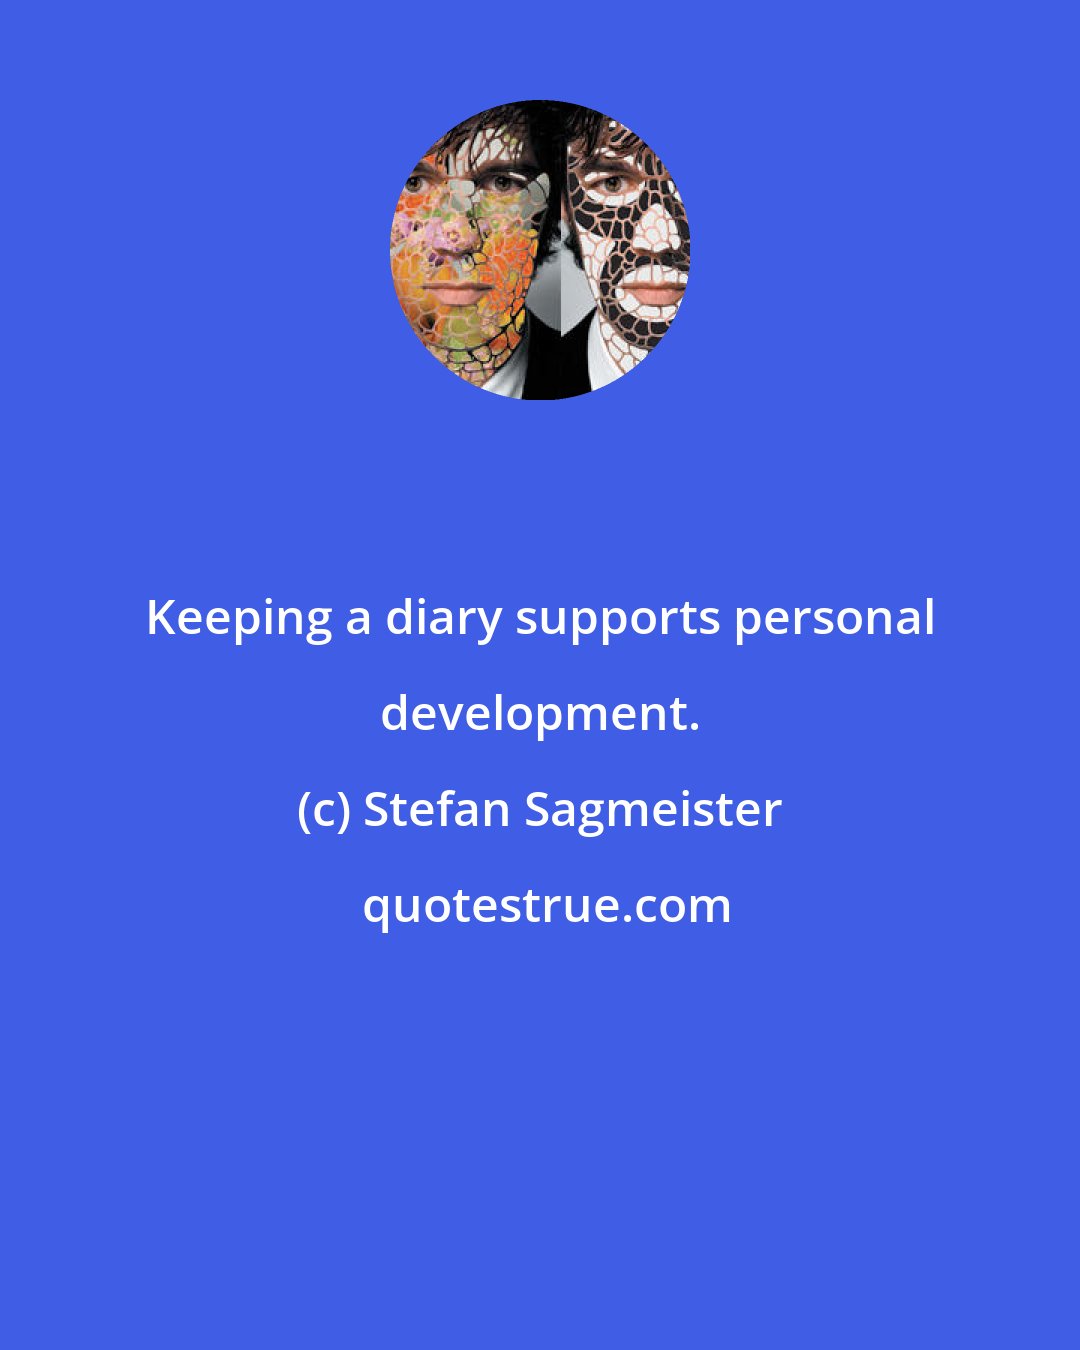 Stefan Sagmeister: Keeping a diary supports personal development.